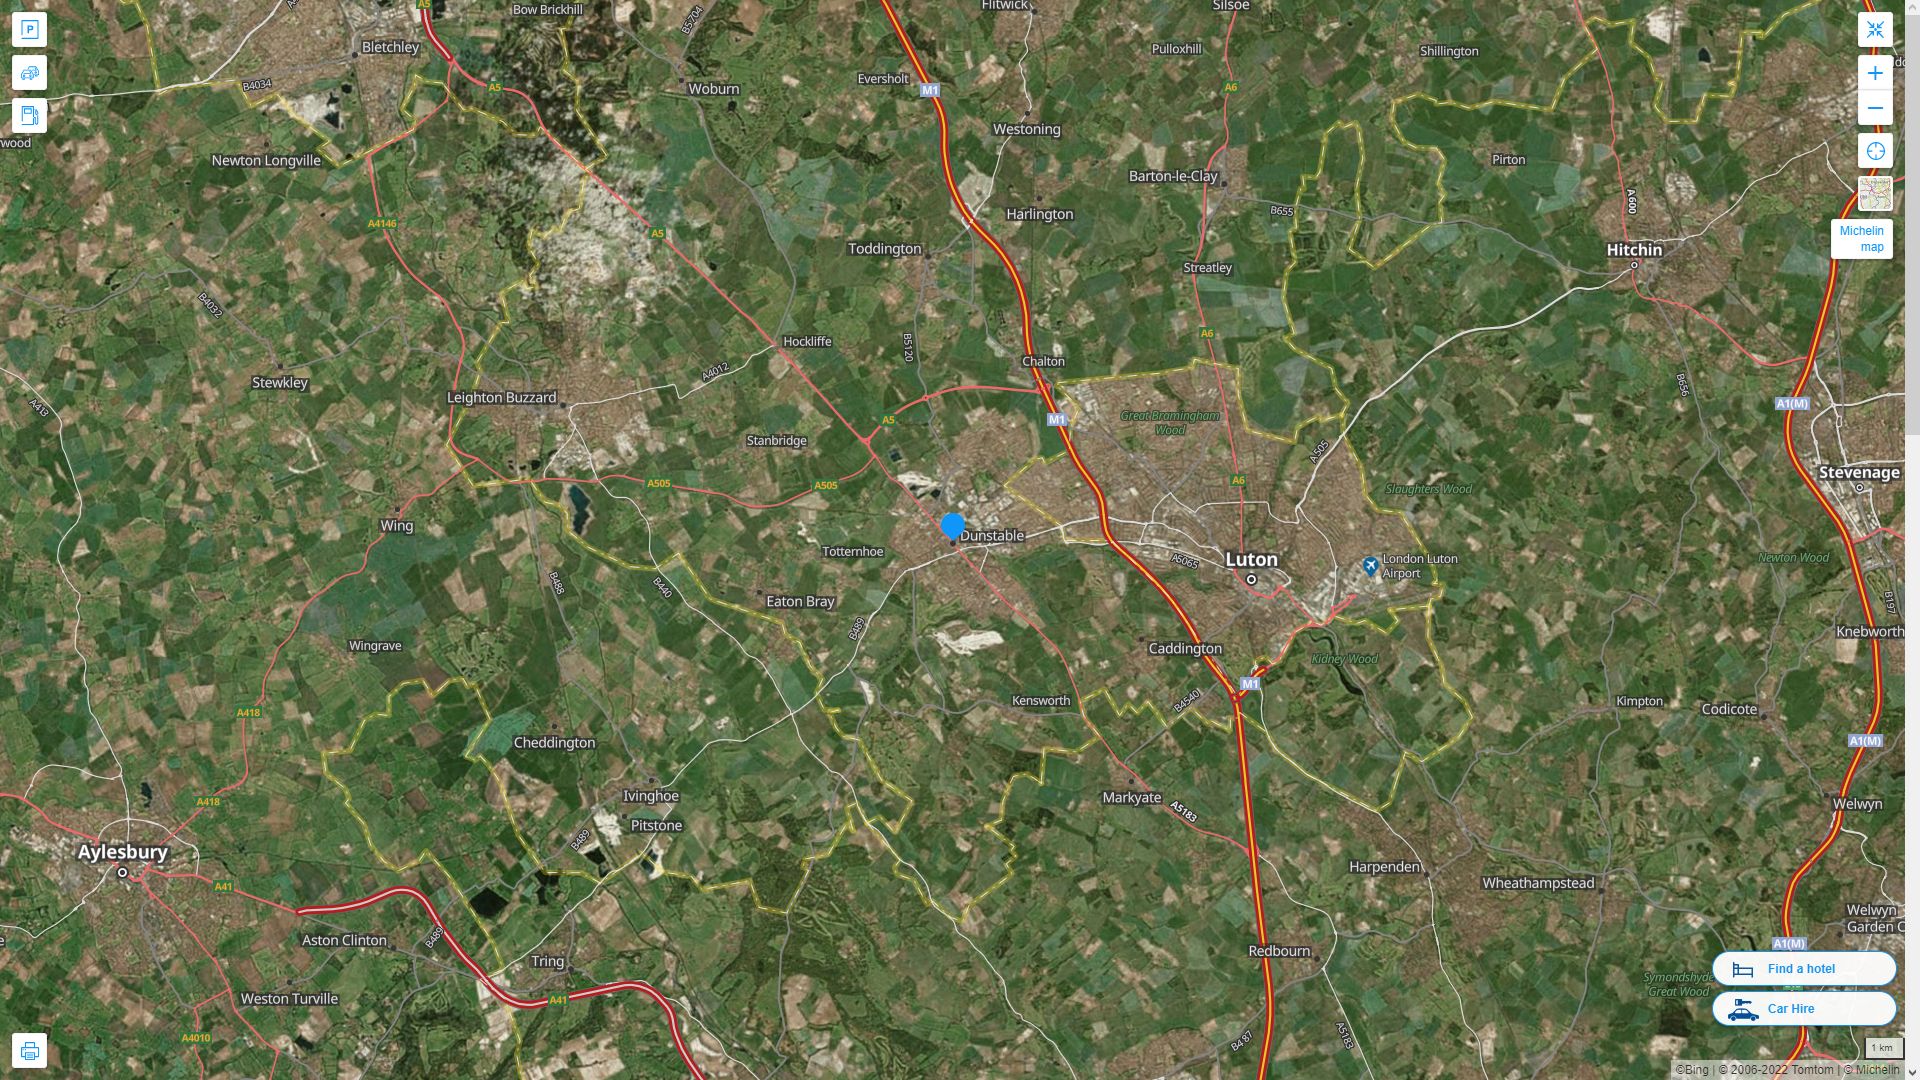 Dunstable Highway and Road Map with Satellite View